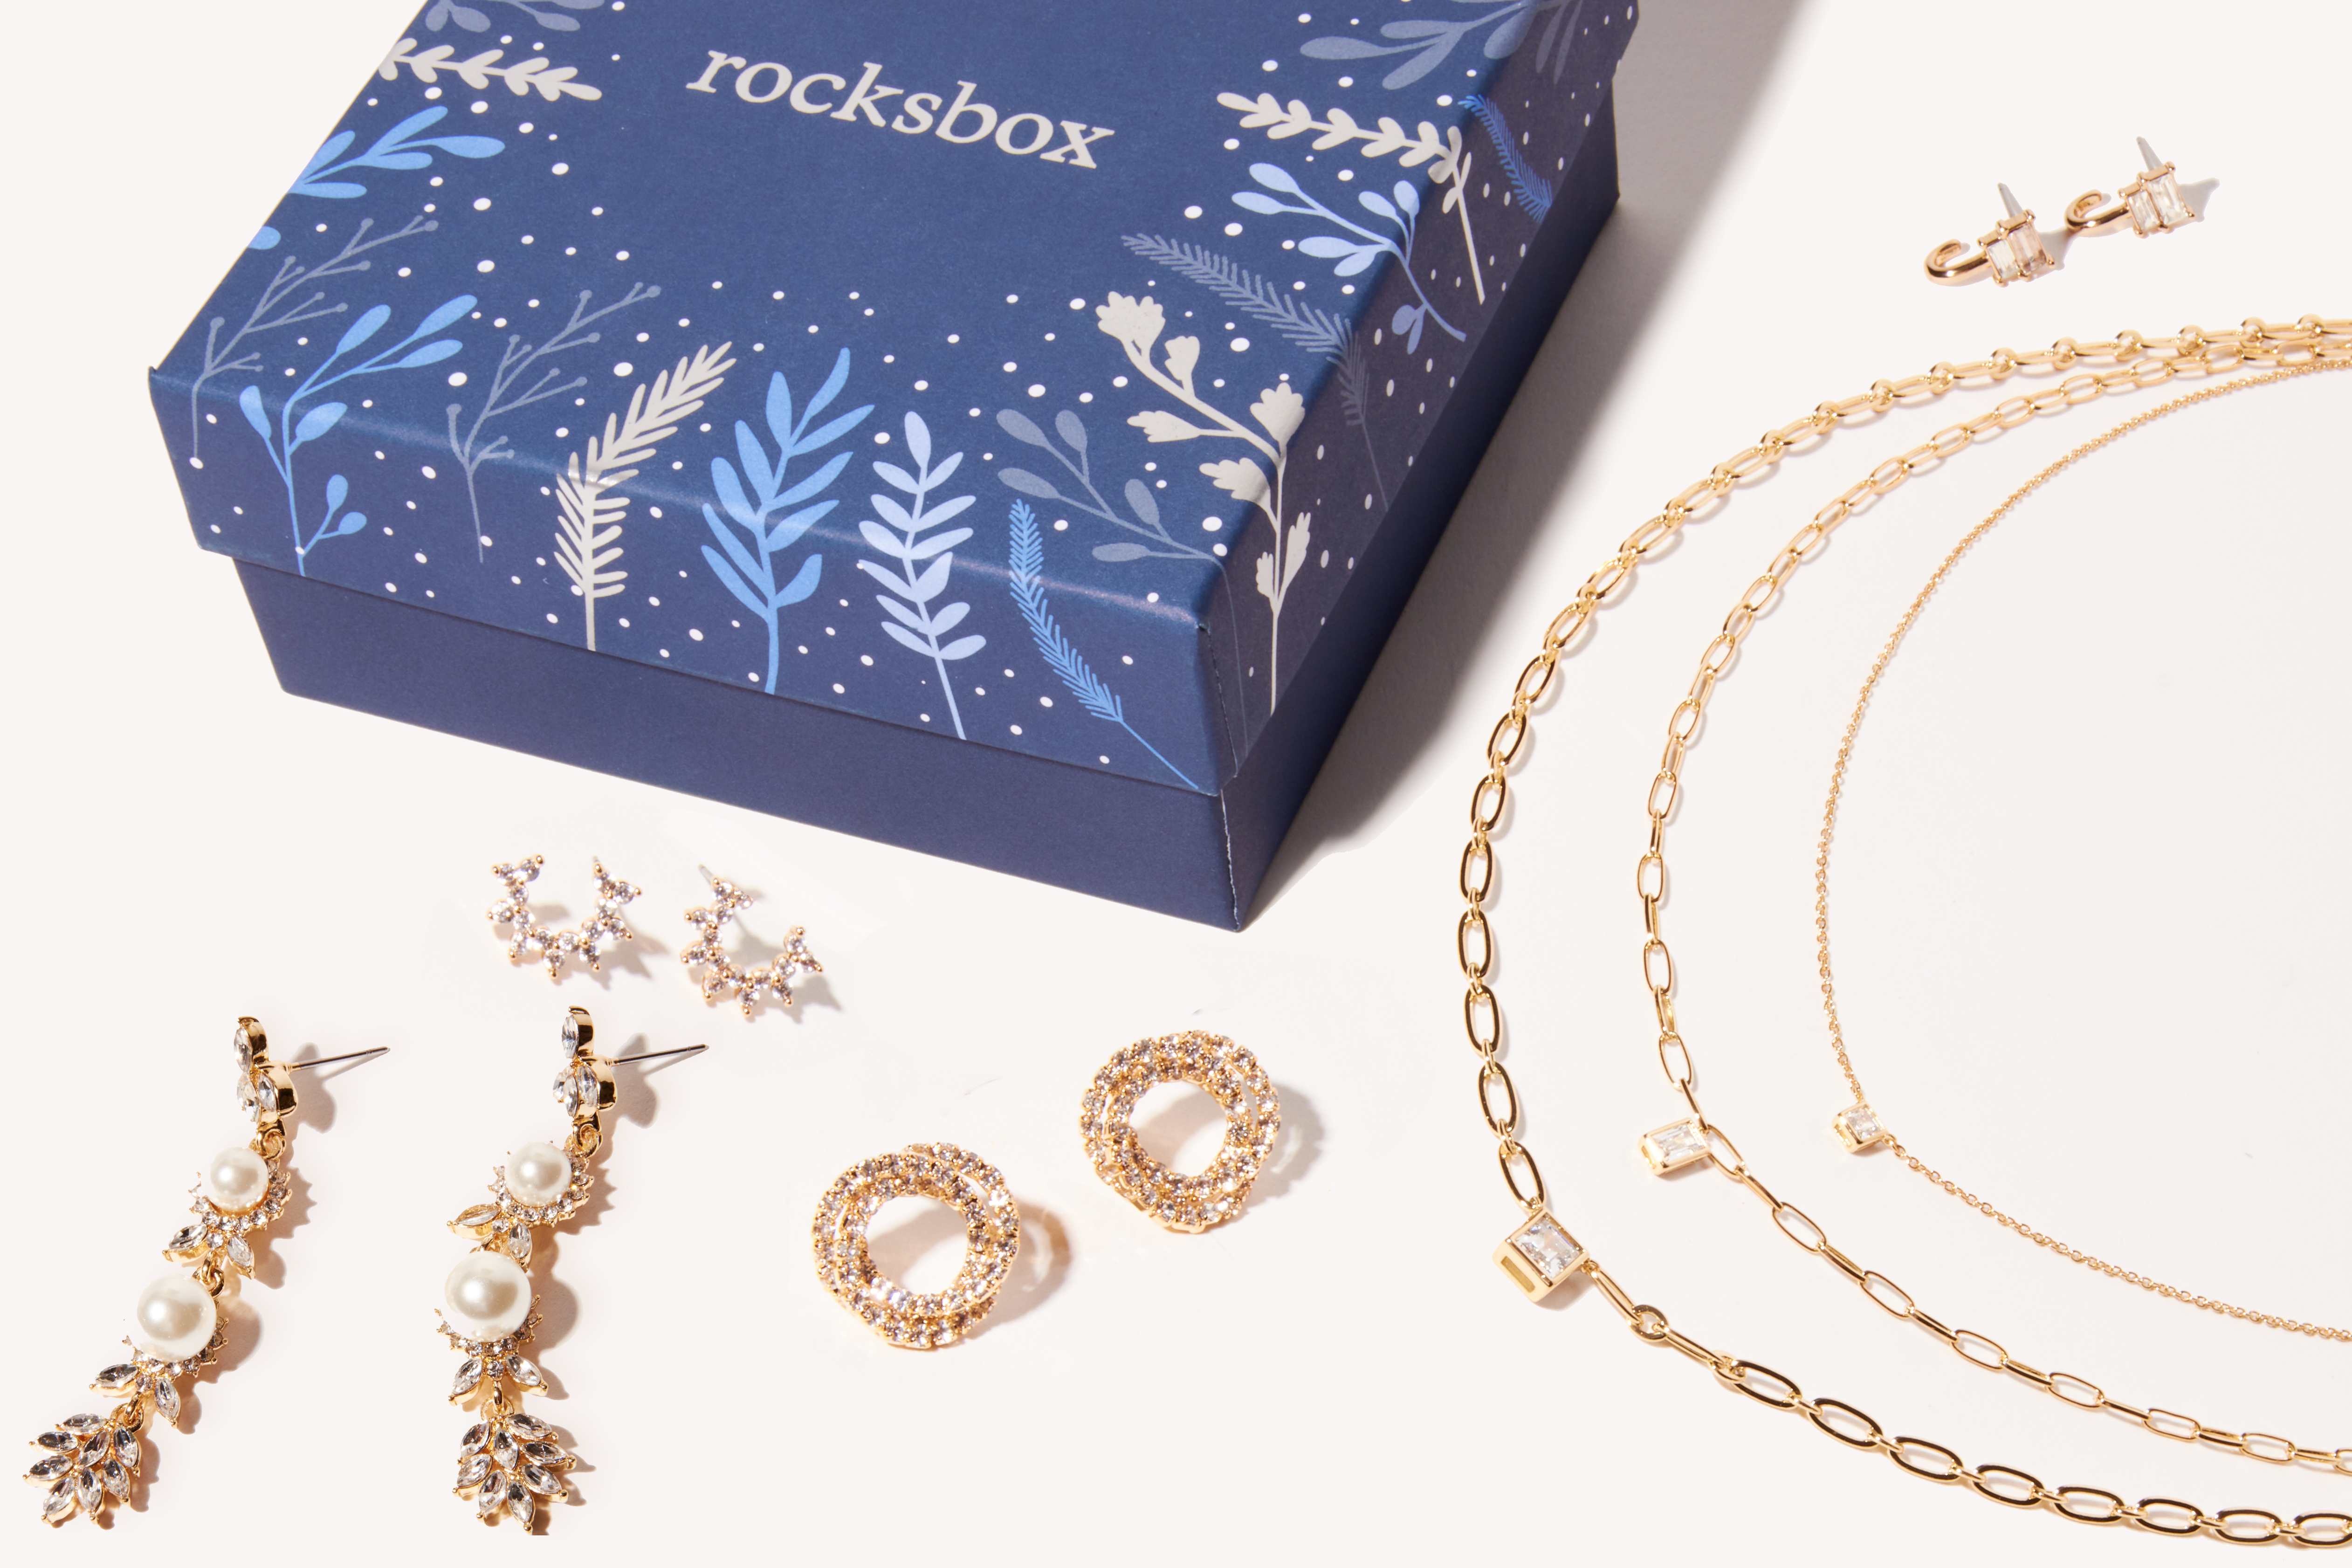 MSA Exclusive Holiday Deal – Rocksbox – First Month Free + $15 Credit